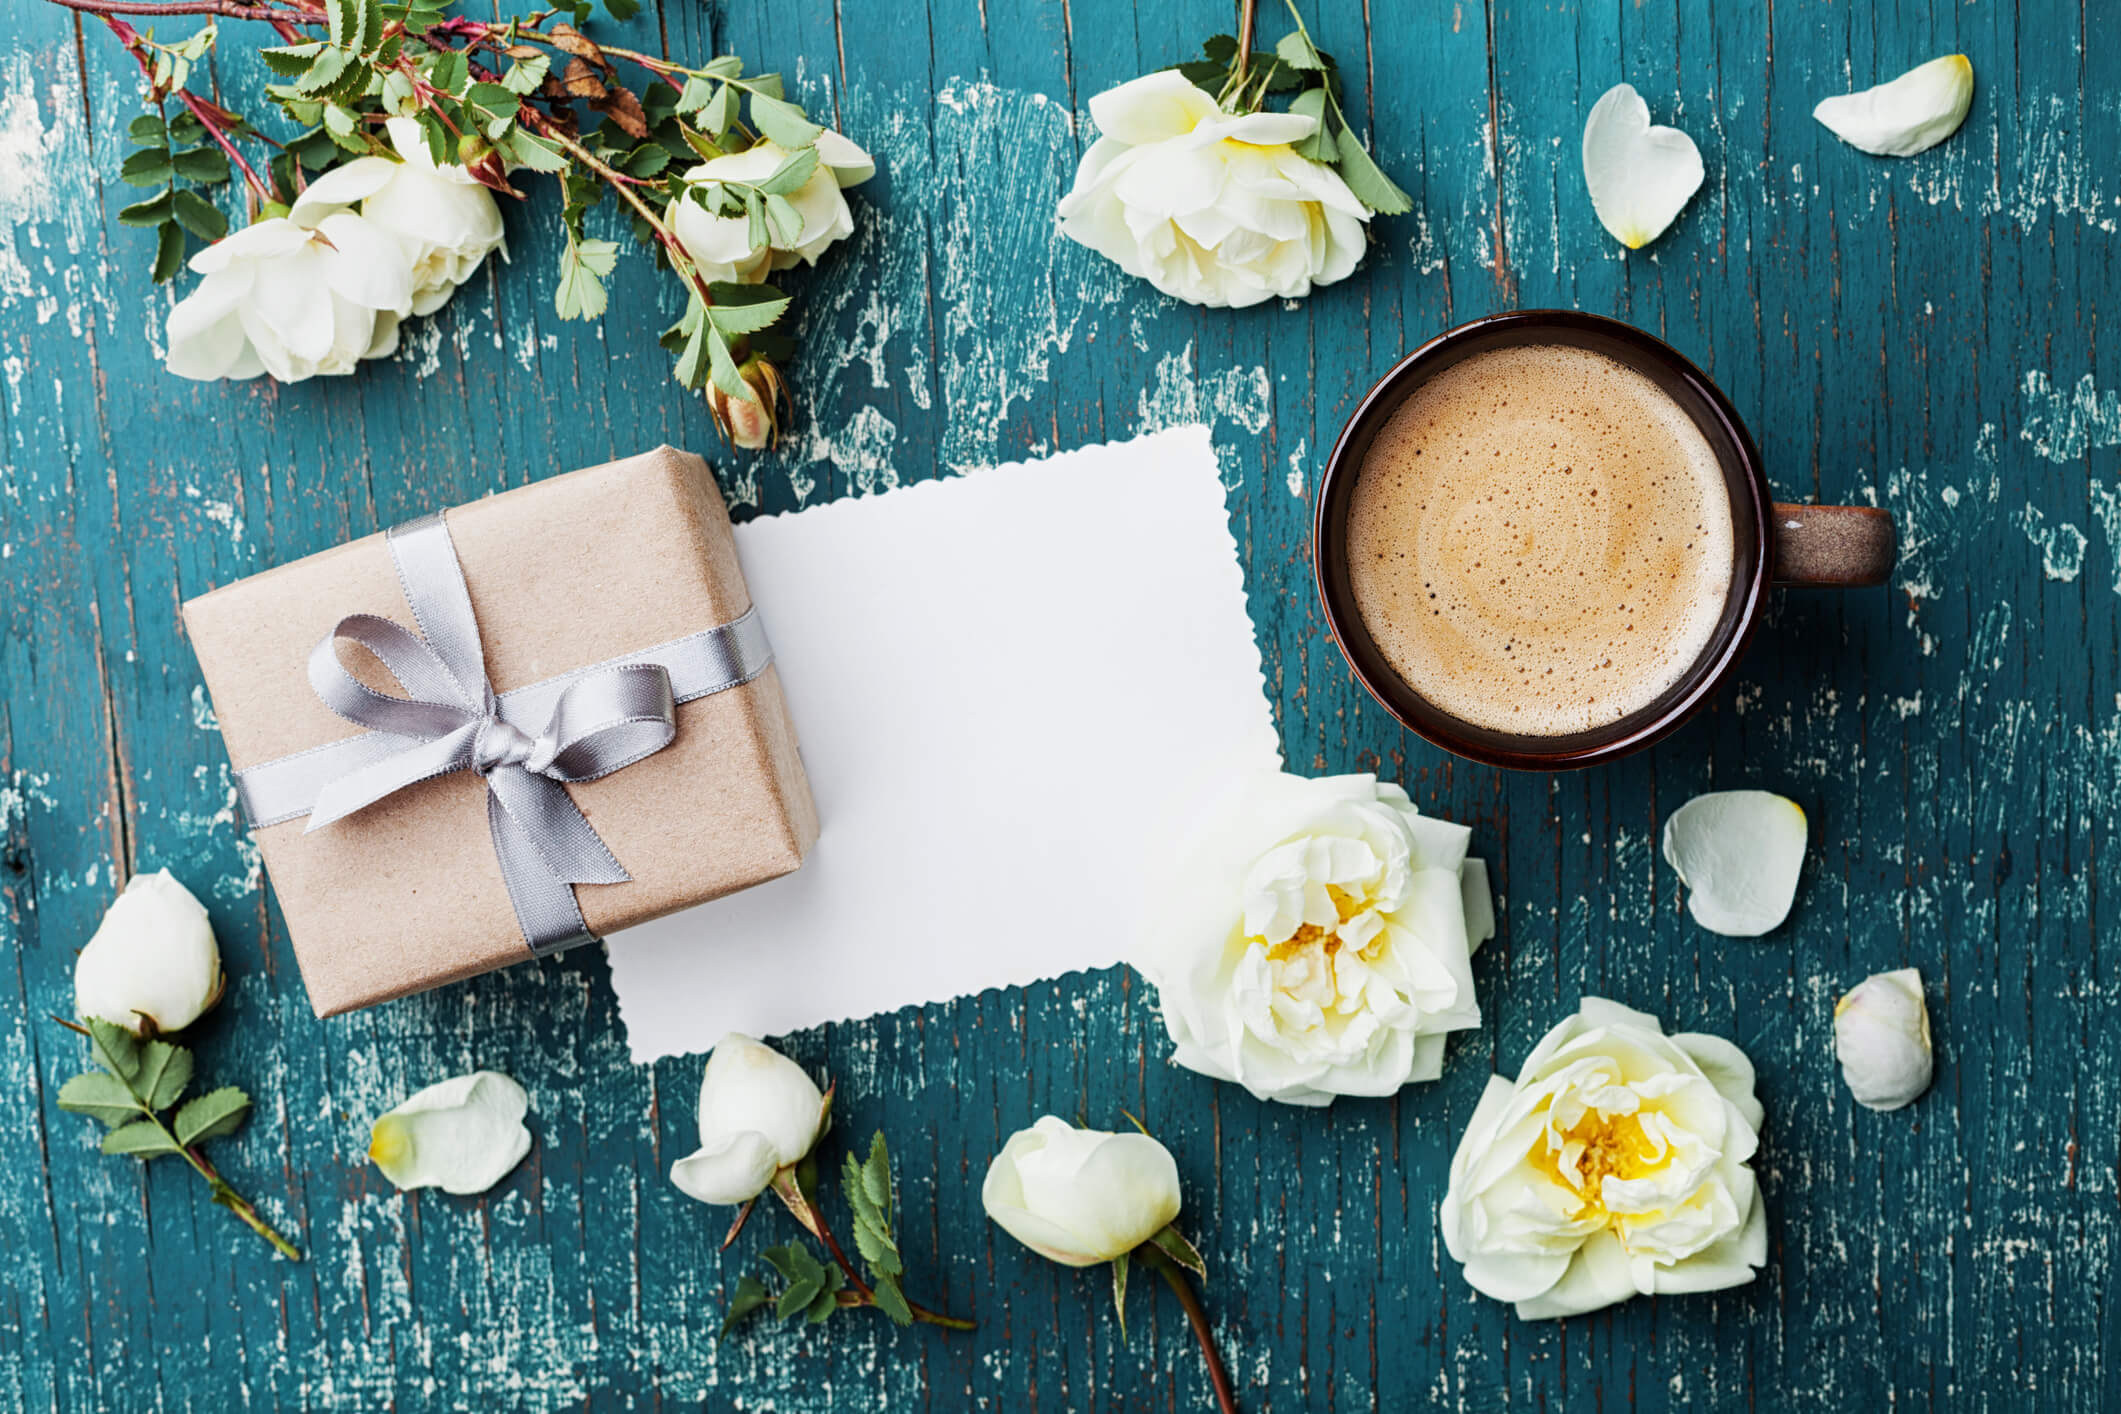 How I Saved More Than $1,600 on My Wedding: Bridal Party Gifts